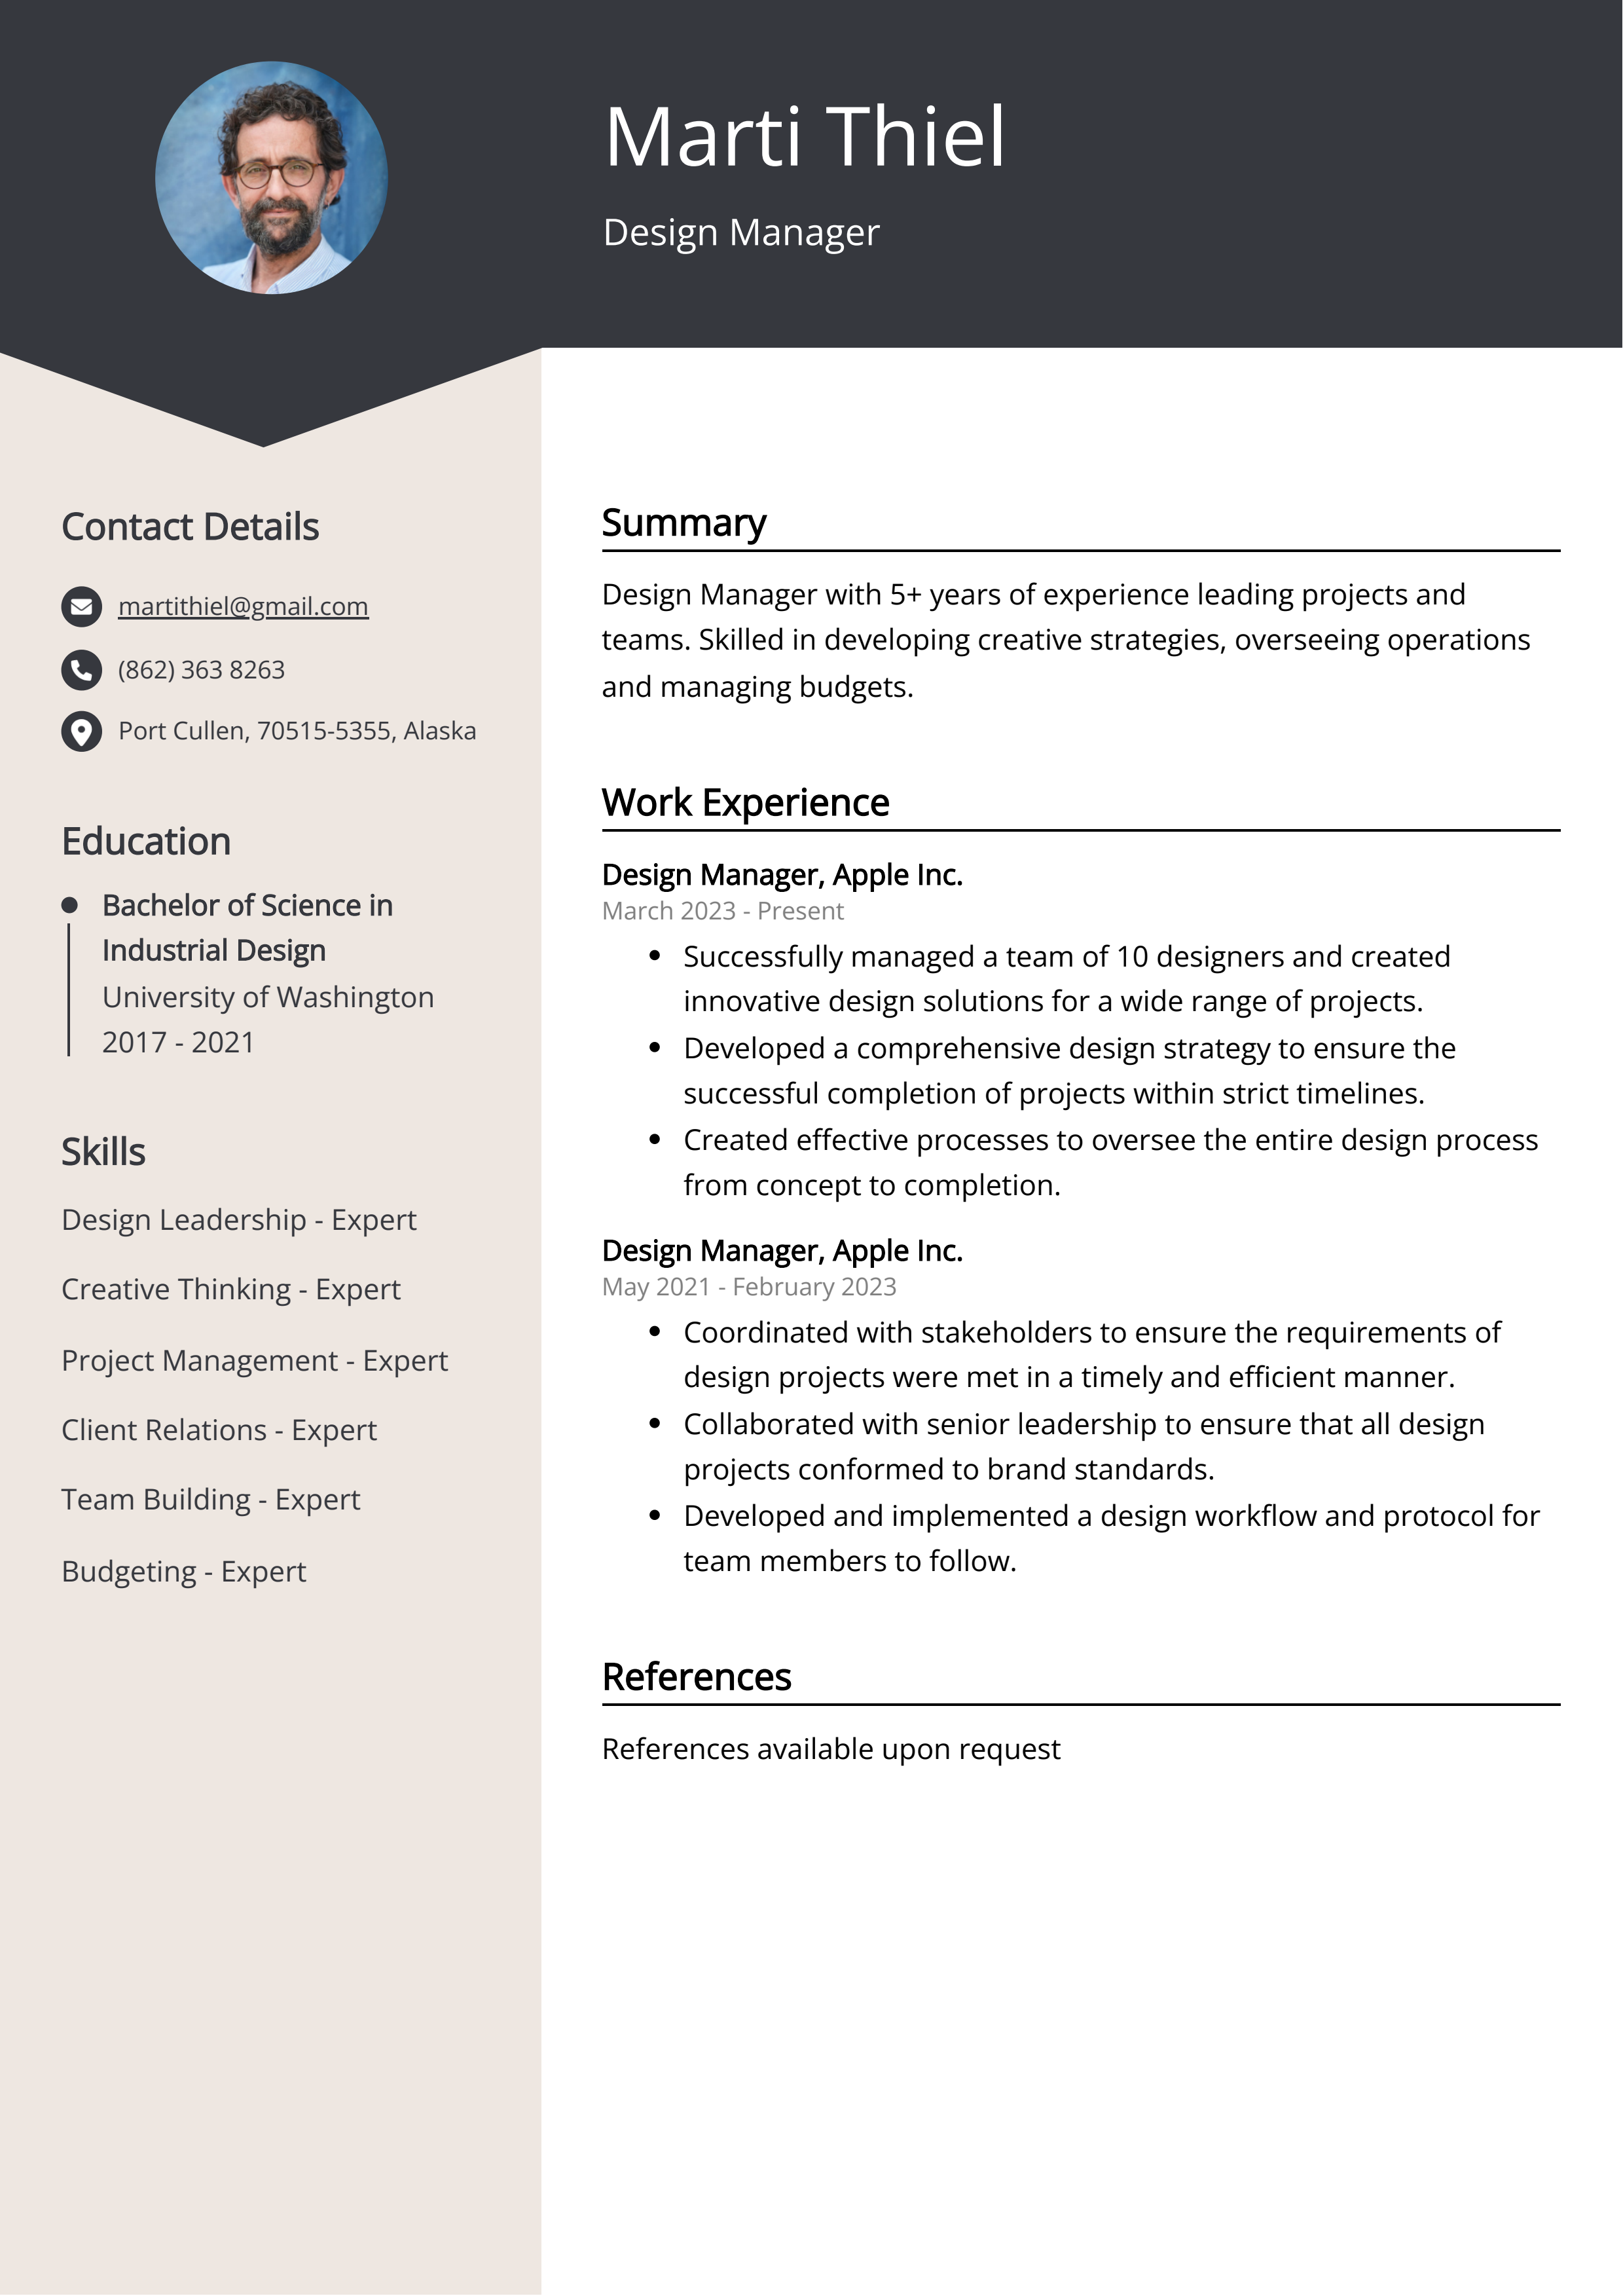 Design Manager Resume Example